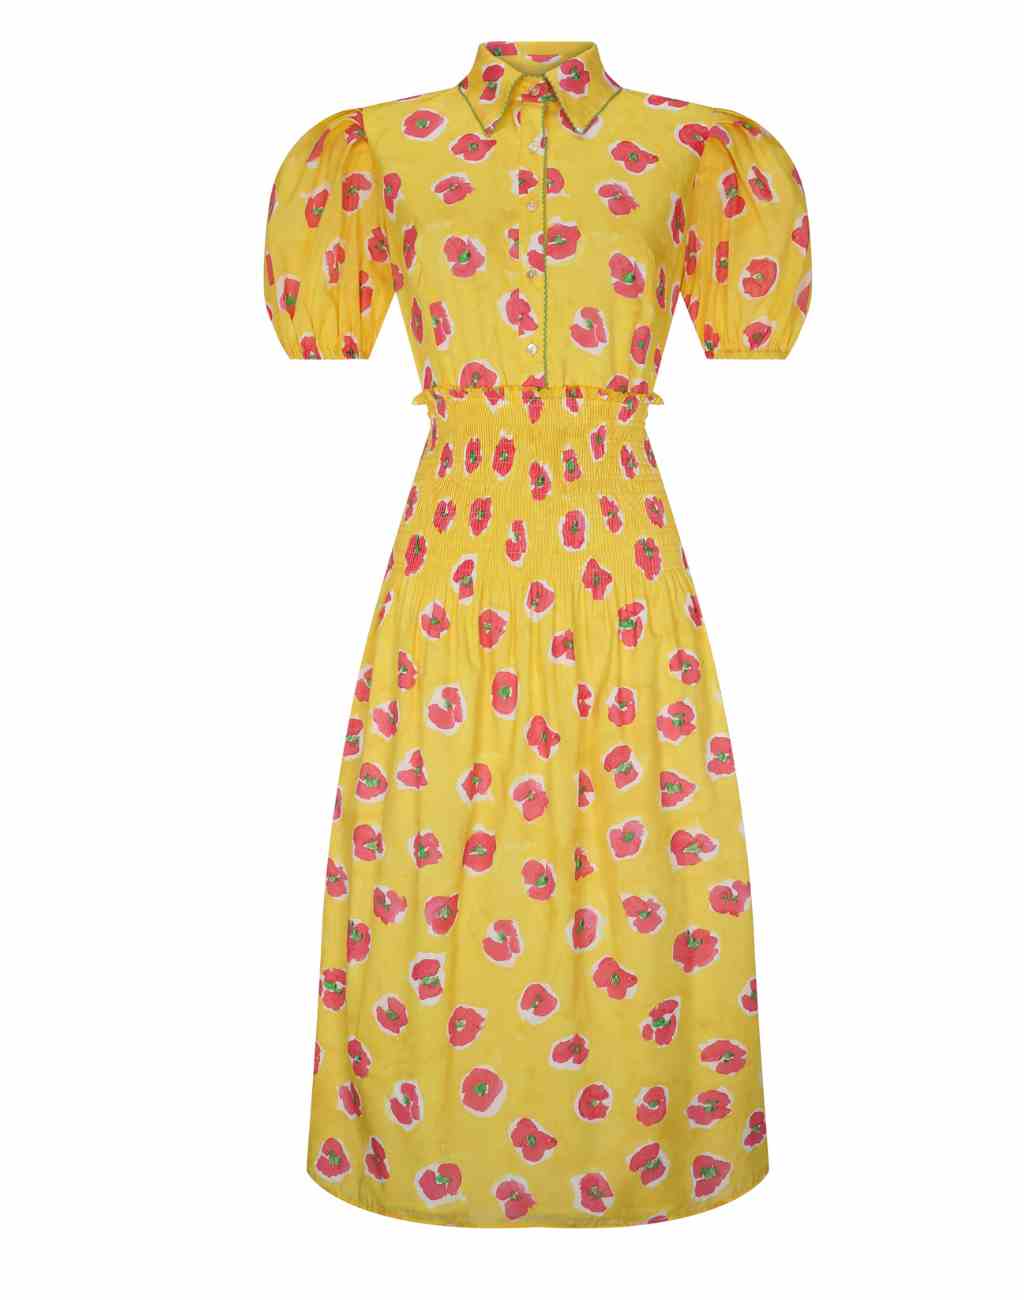 Begonia Print Mote Dress with Puffed Sleeves and Shirred Waist